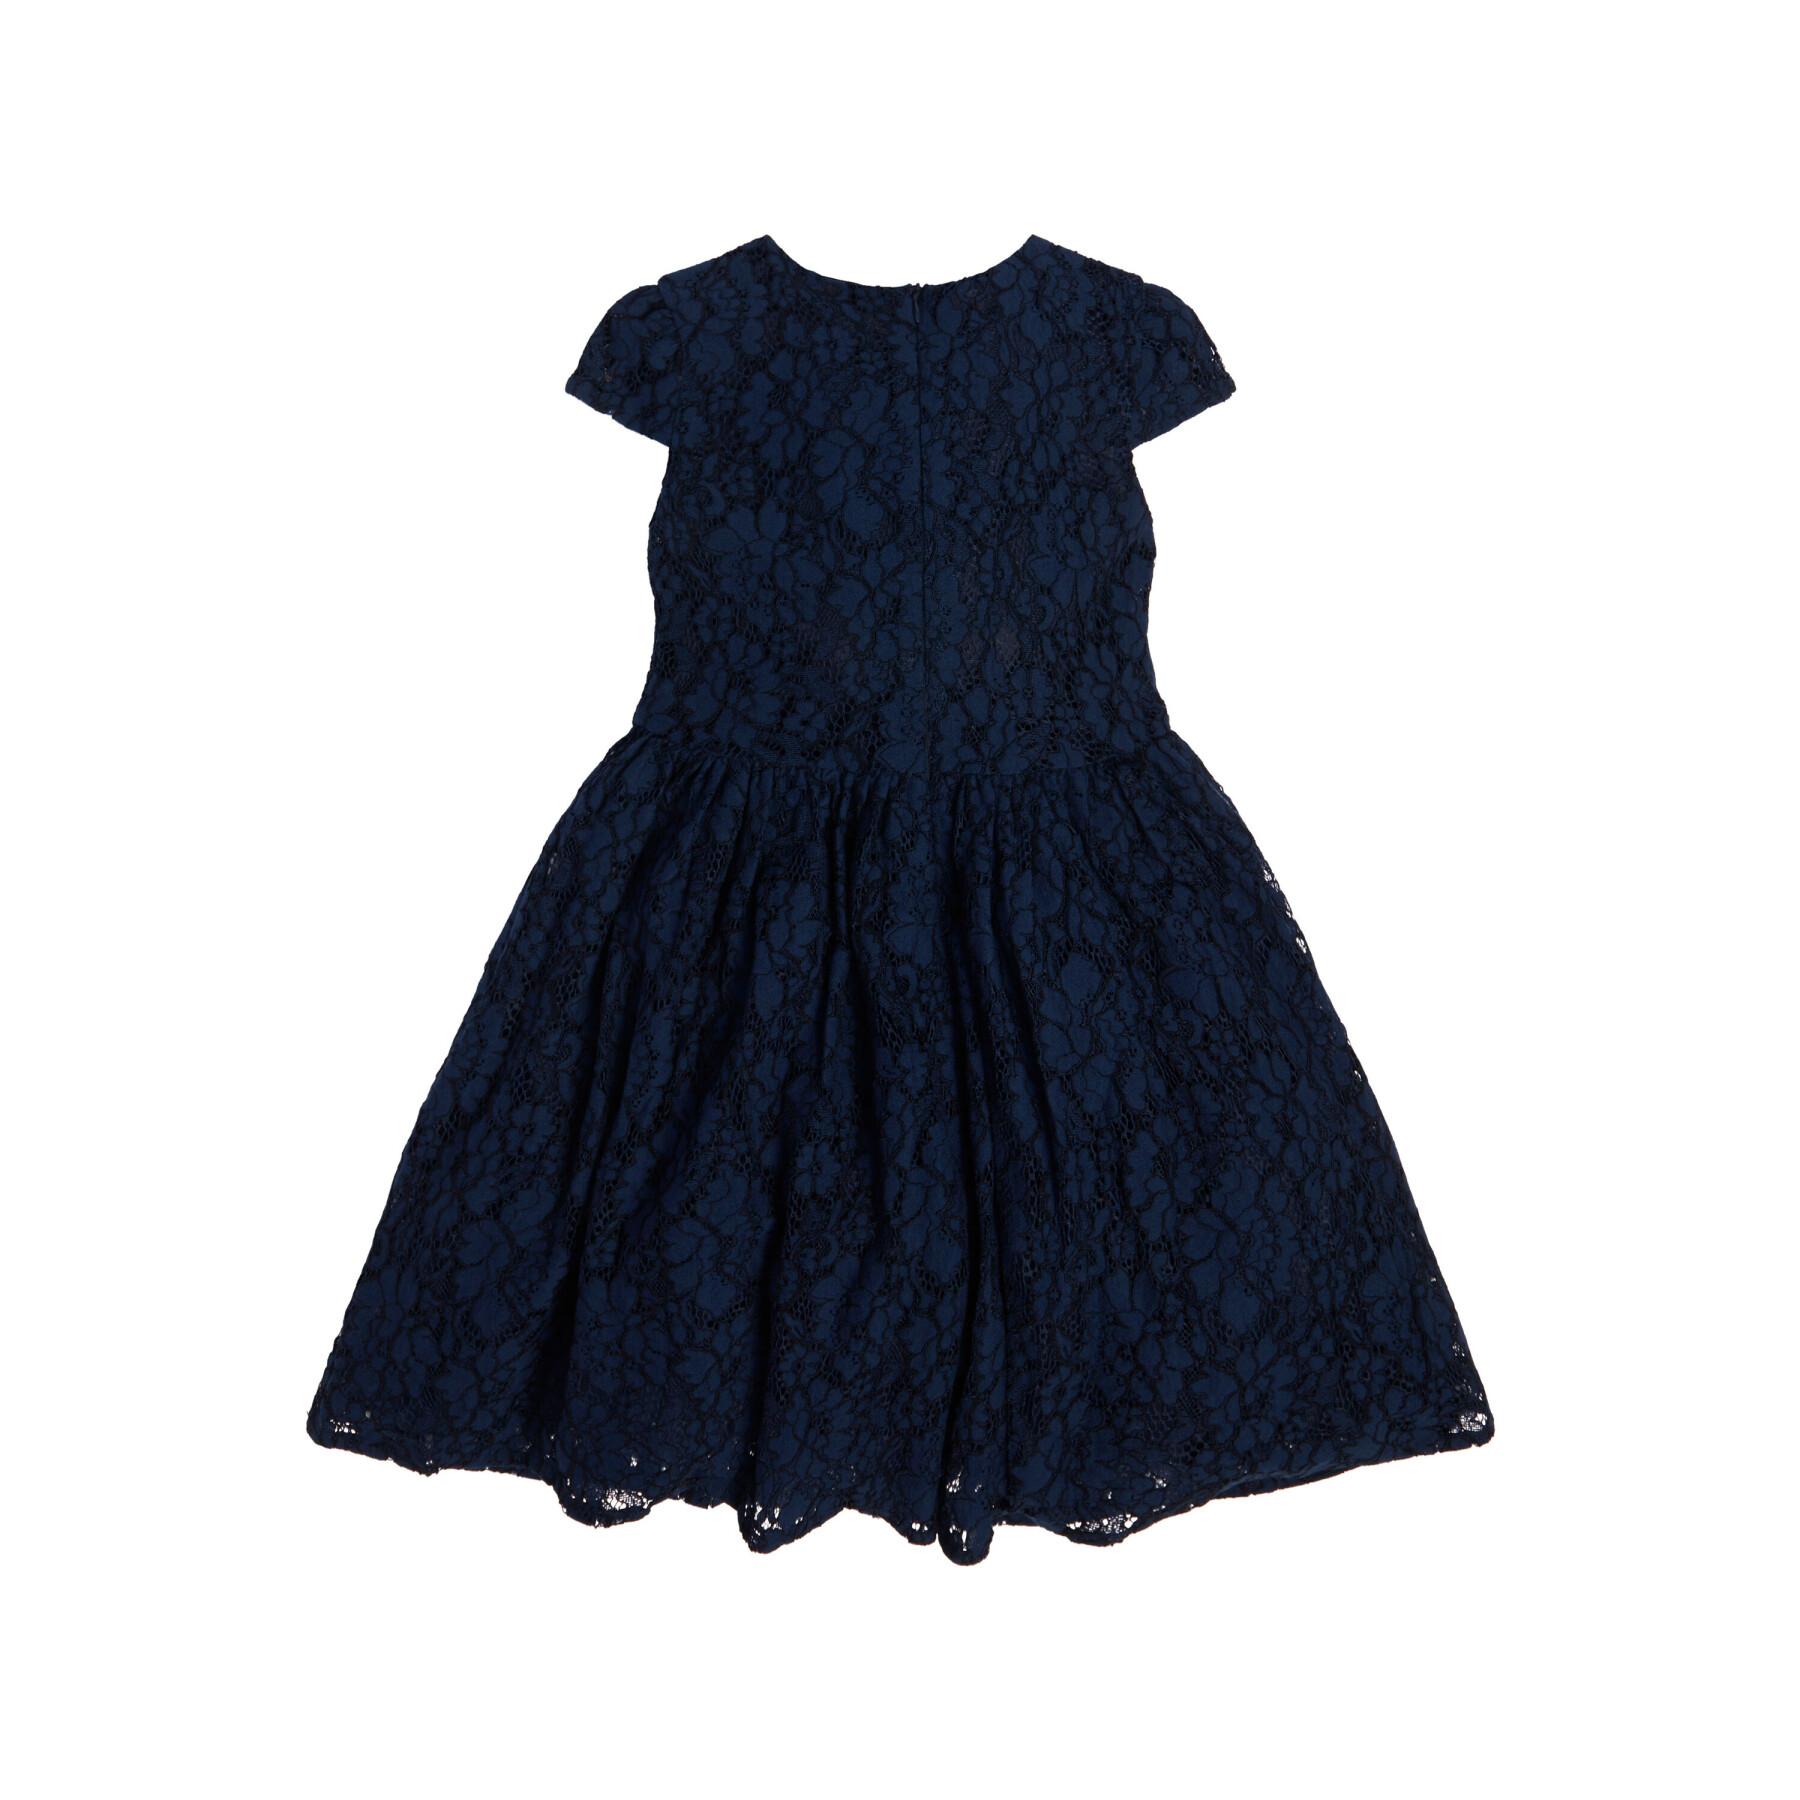 Girl's lace dress Guess Ceremony